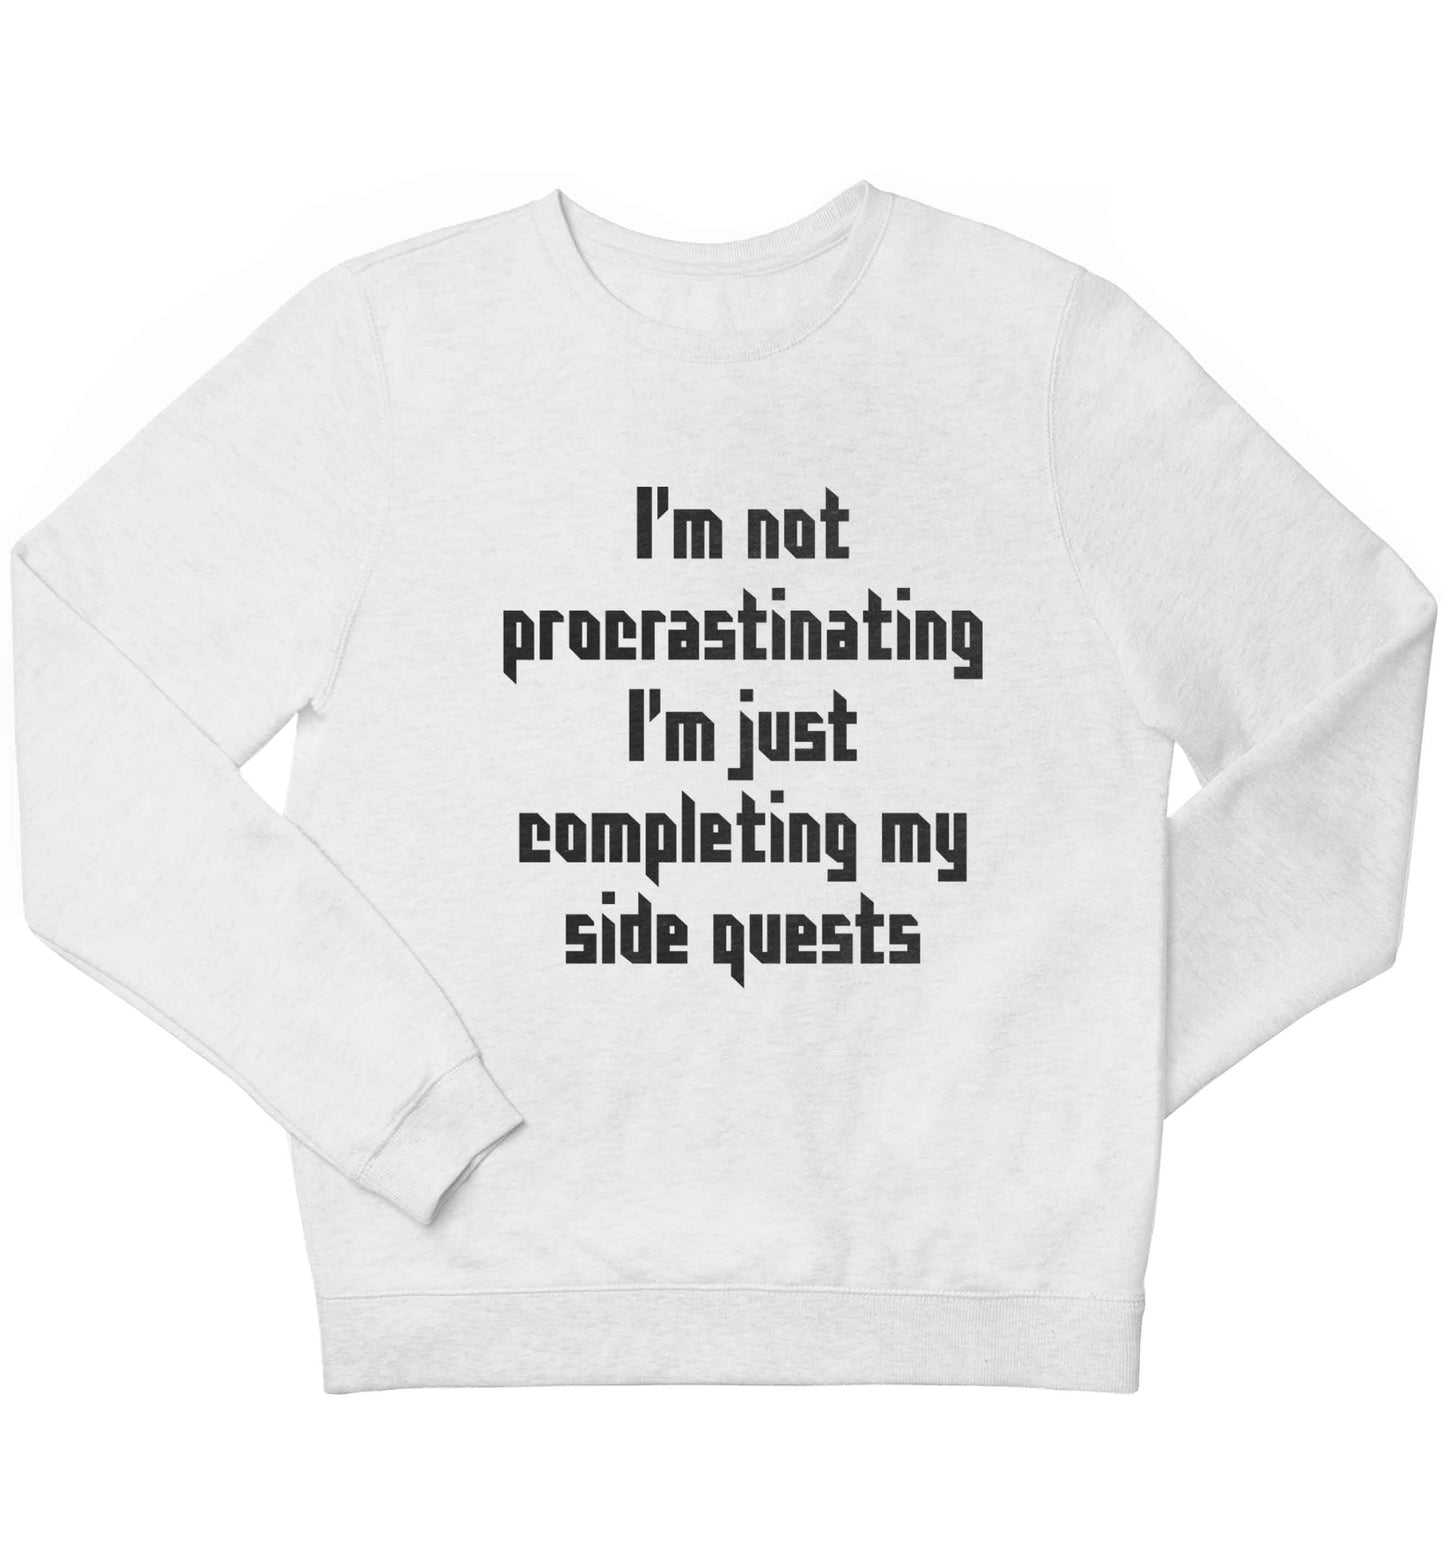 I'm not procrastinating I'm just completing my side quests children's white sweater 12-13 Years